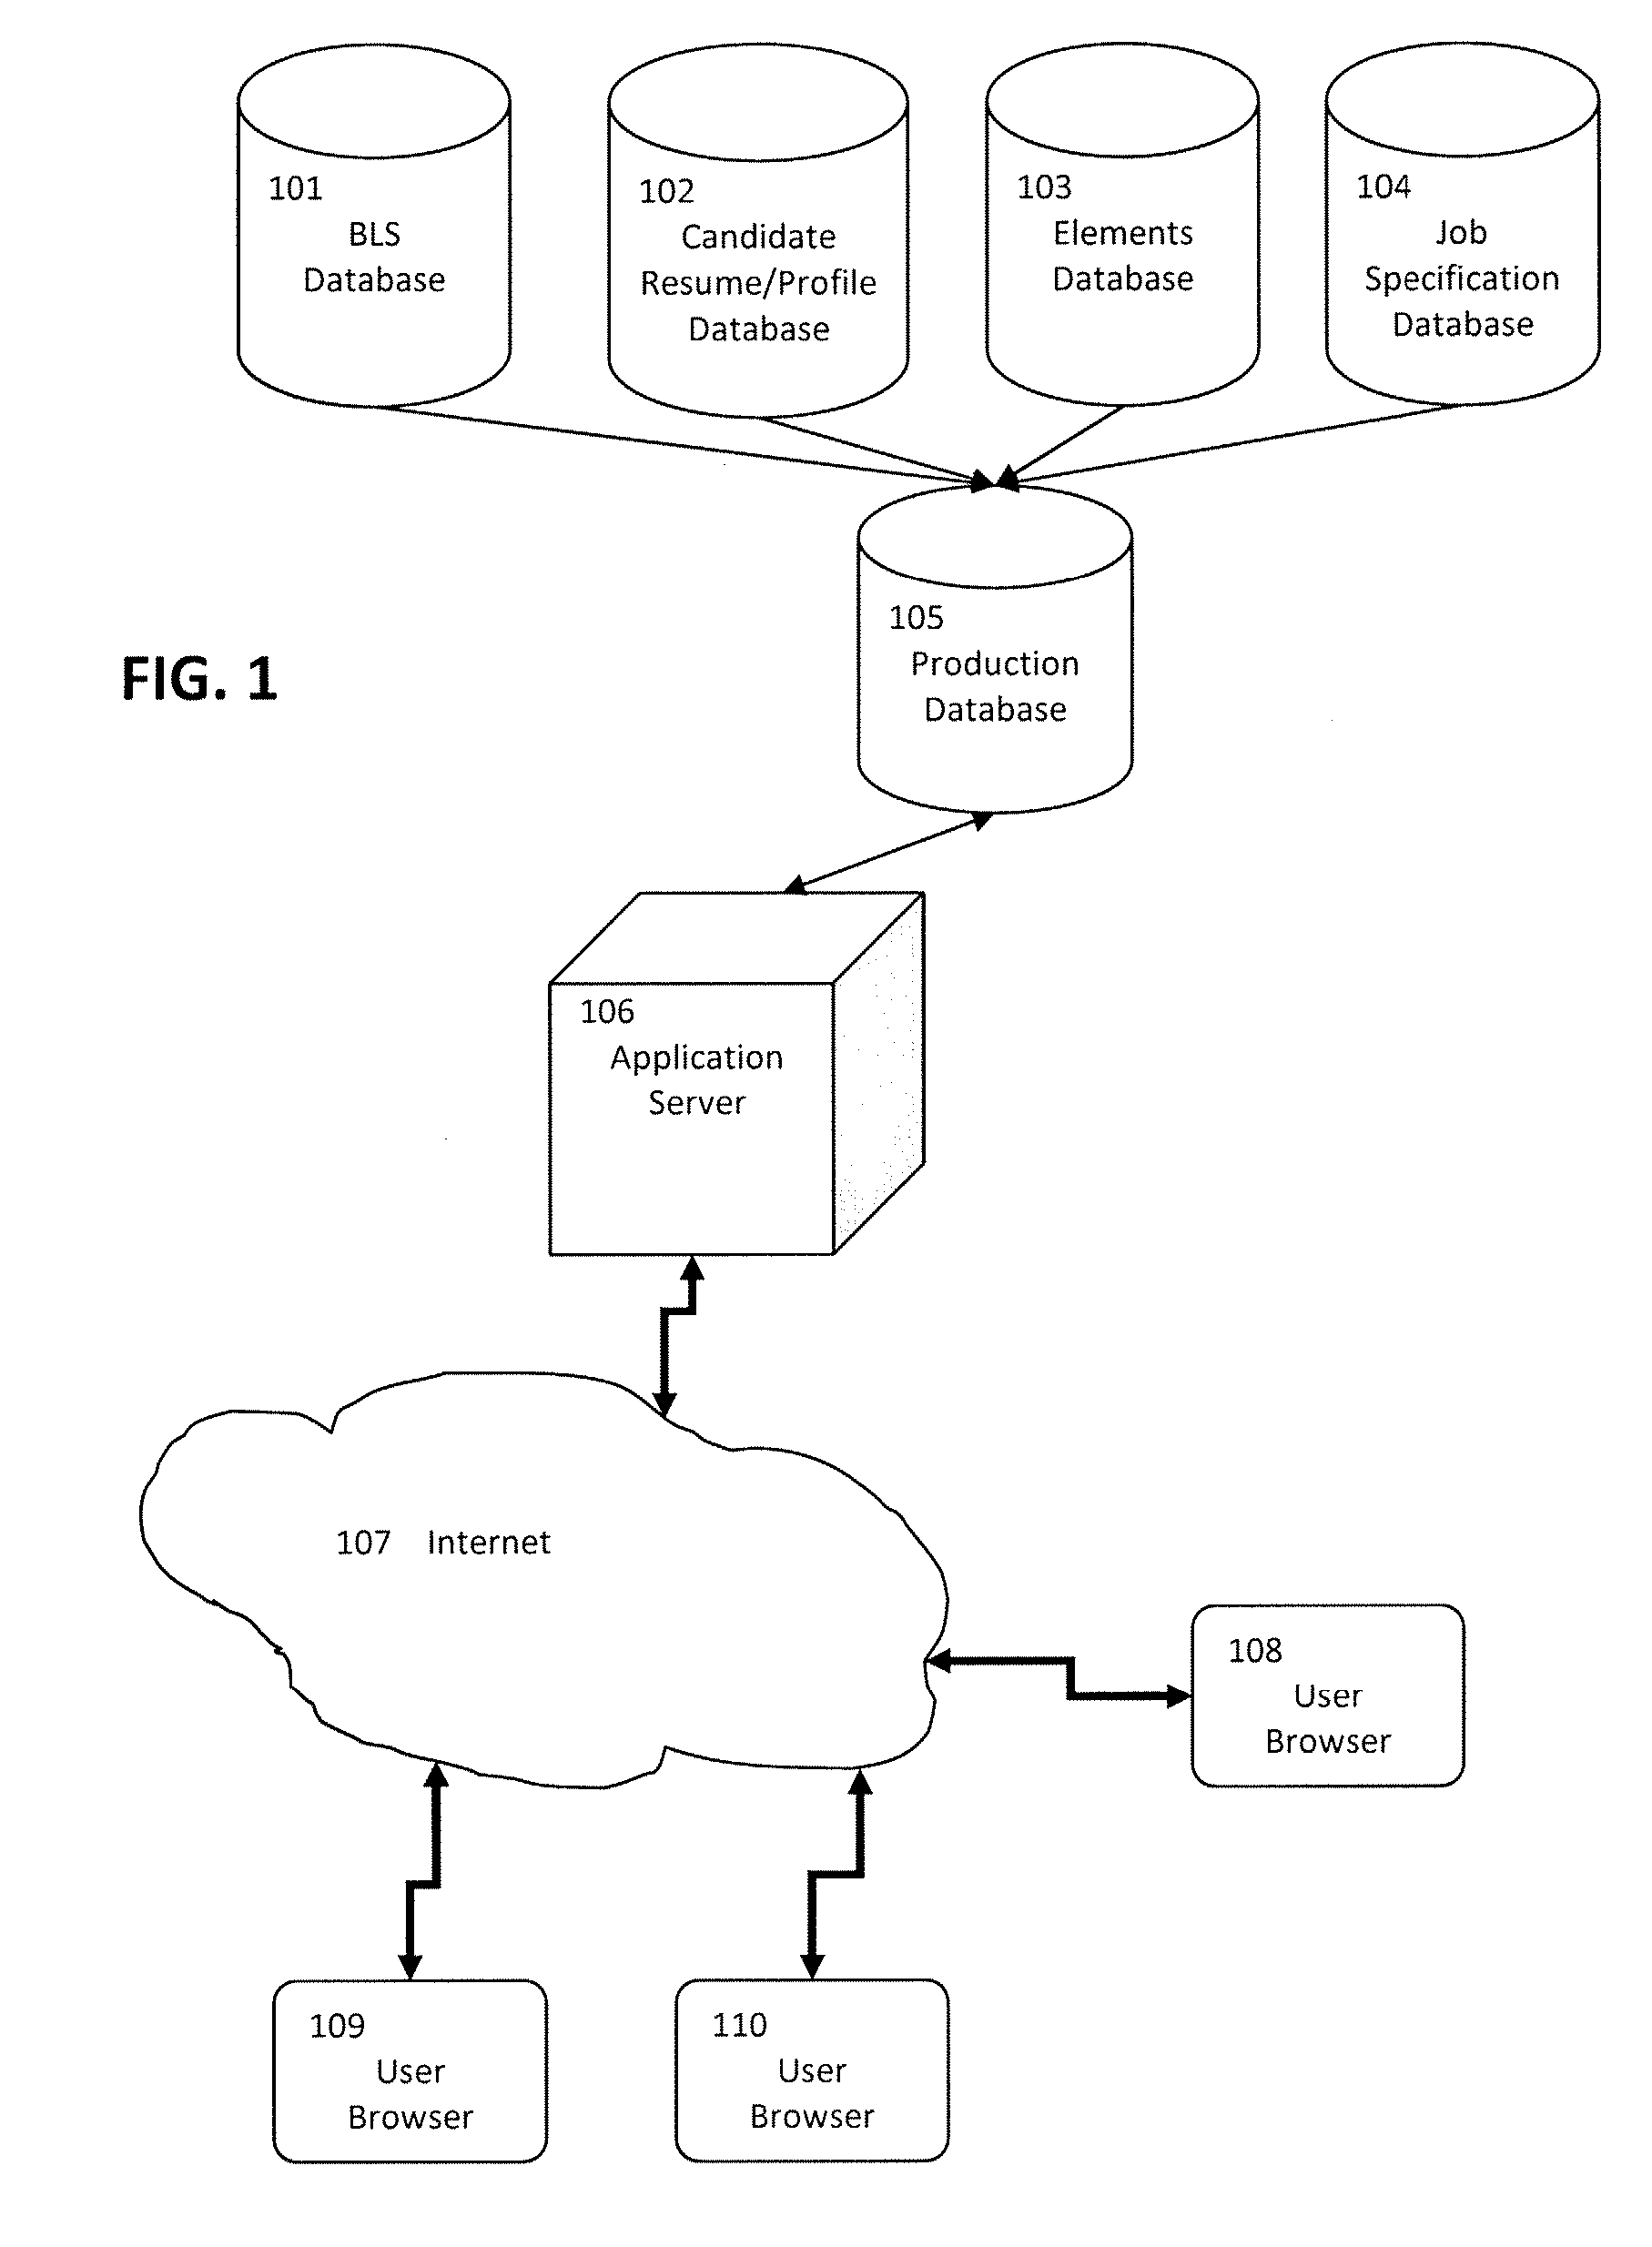 System and method for automatically processing candidate resumes and job specifications expressed in natural language into a normalized form using frequency analysis